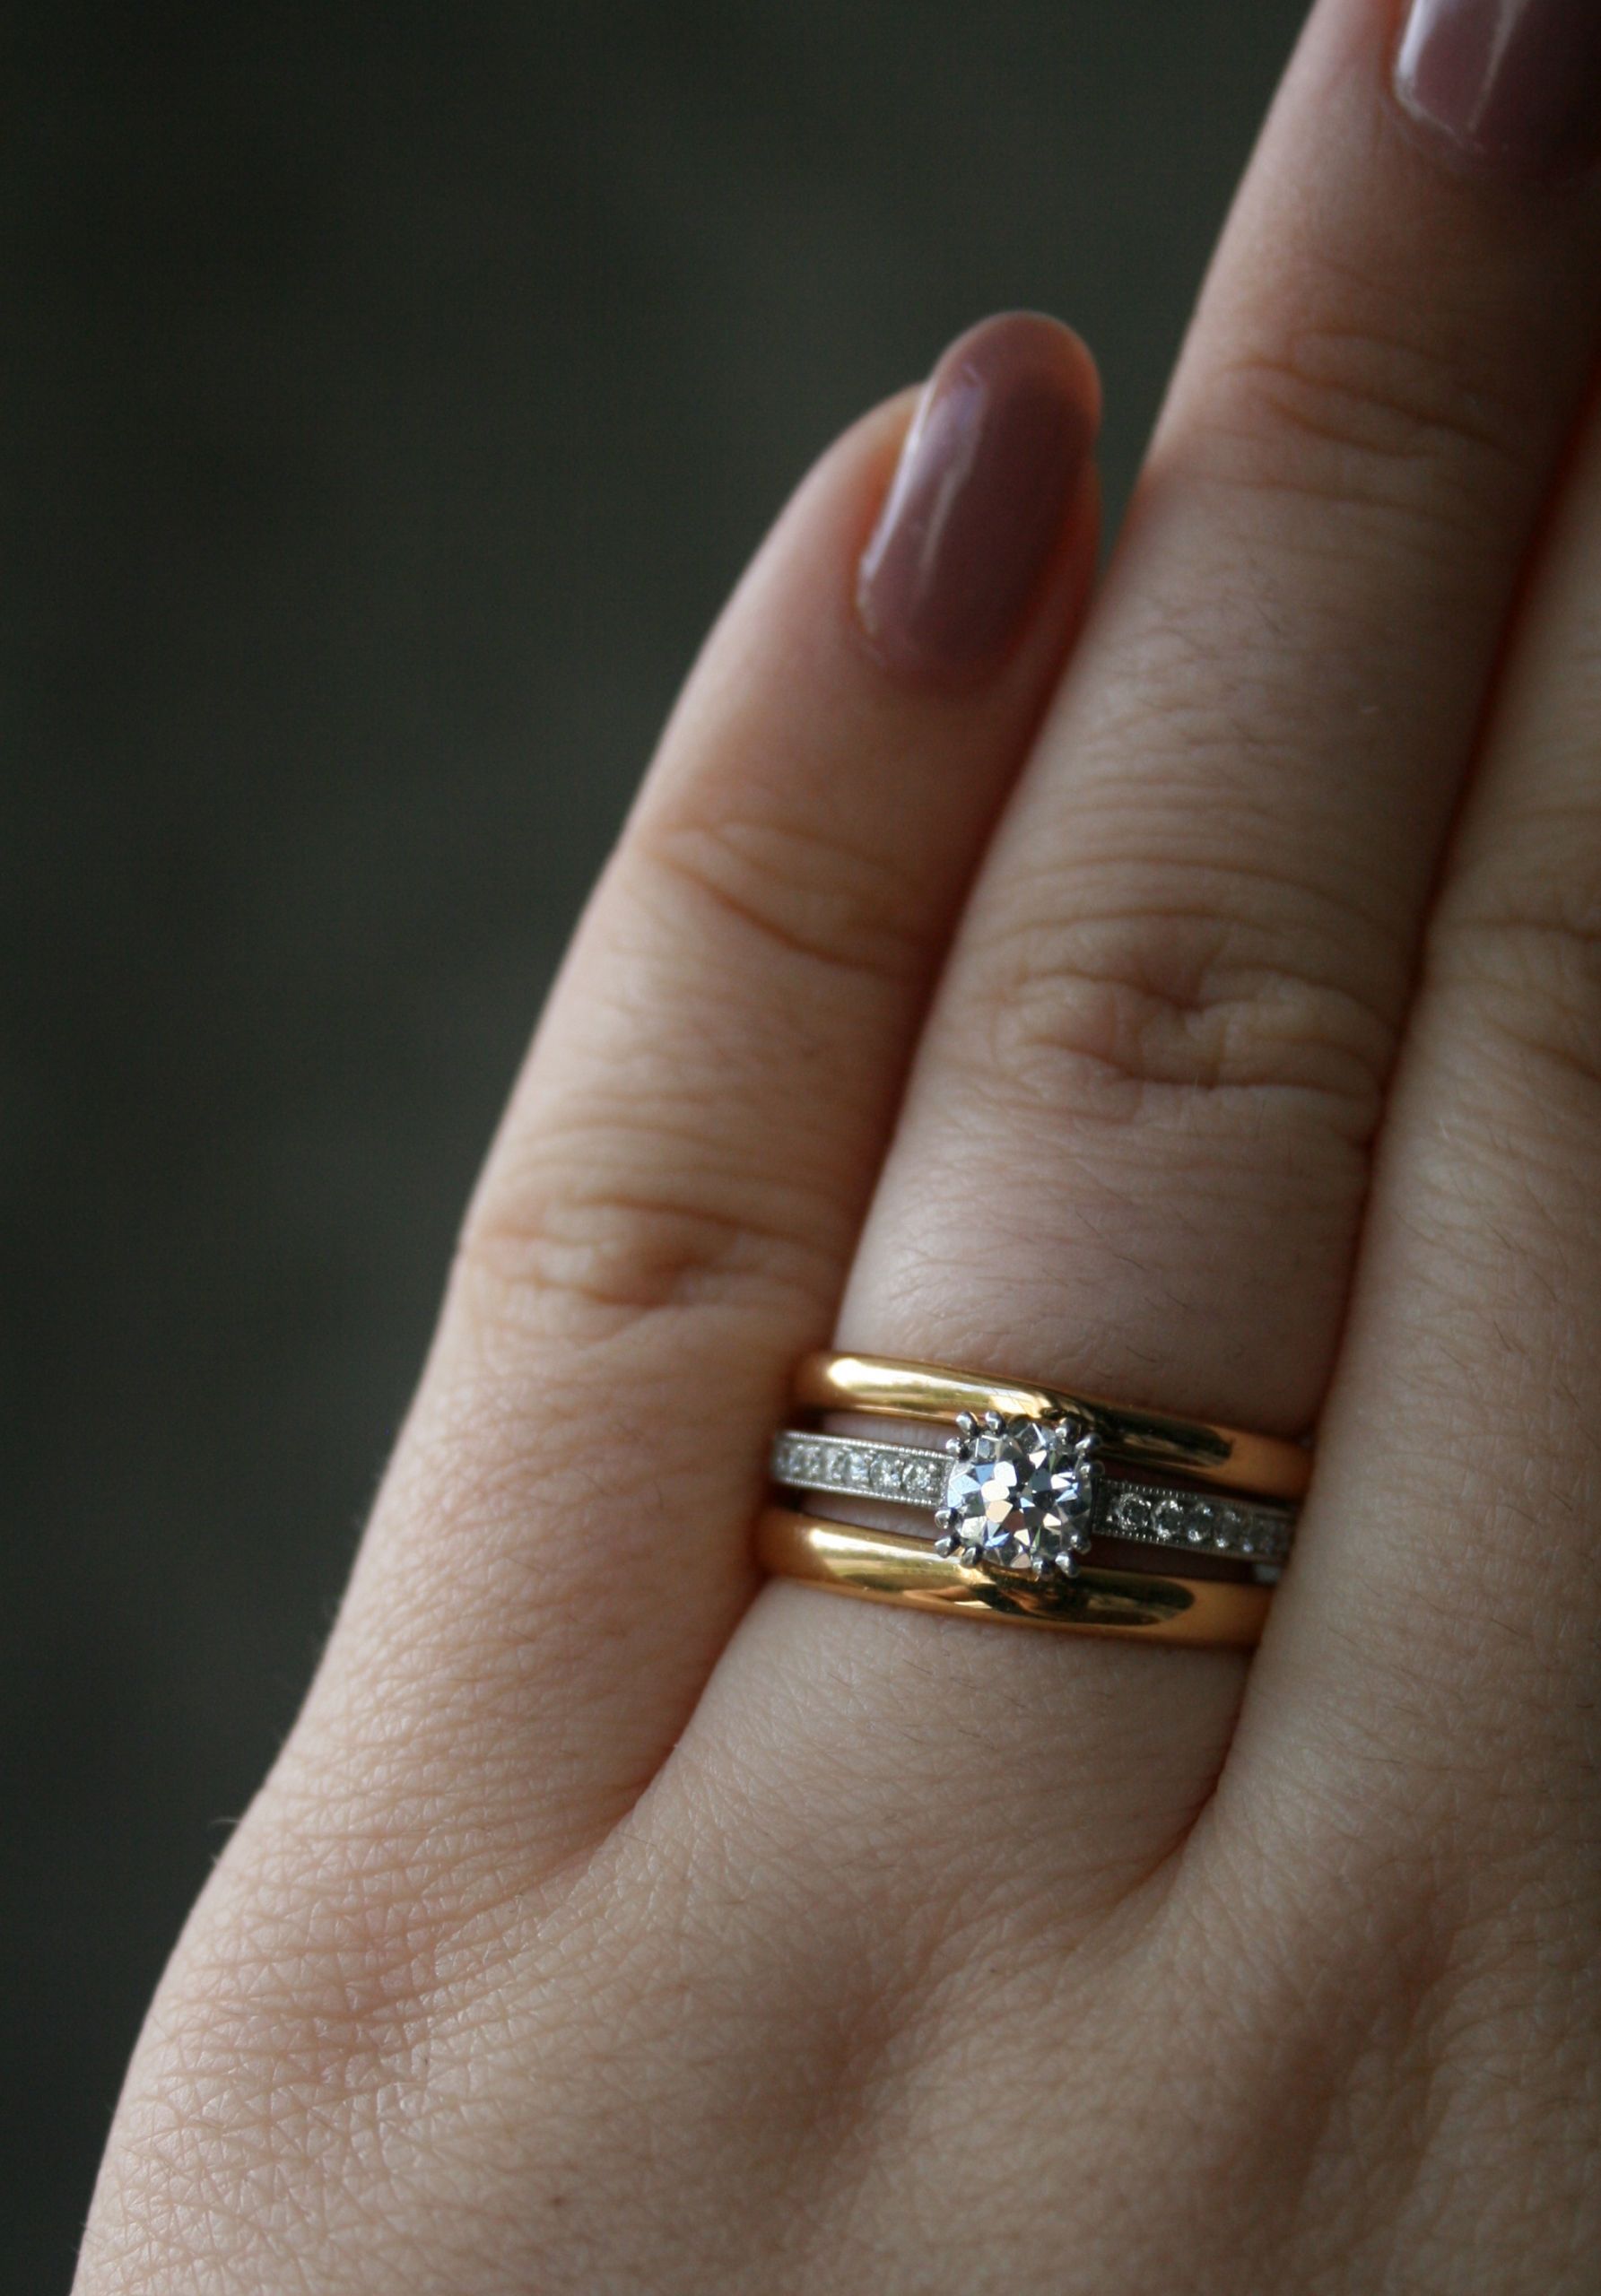 Rose Gold Wedding Band With White Gold Engagement Ring
 Show me your white metal solitaire with yellow or Rose